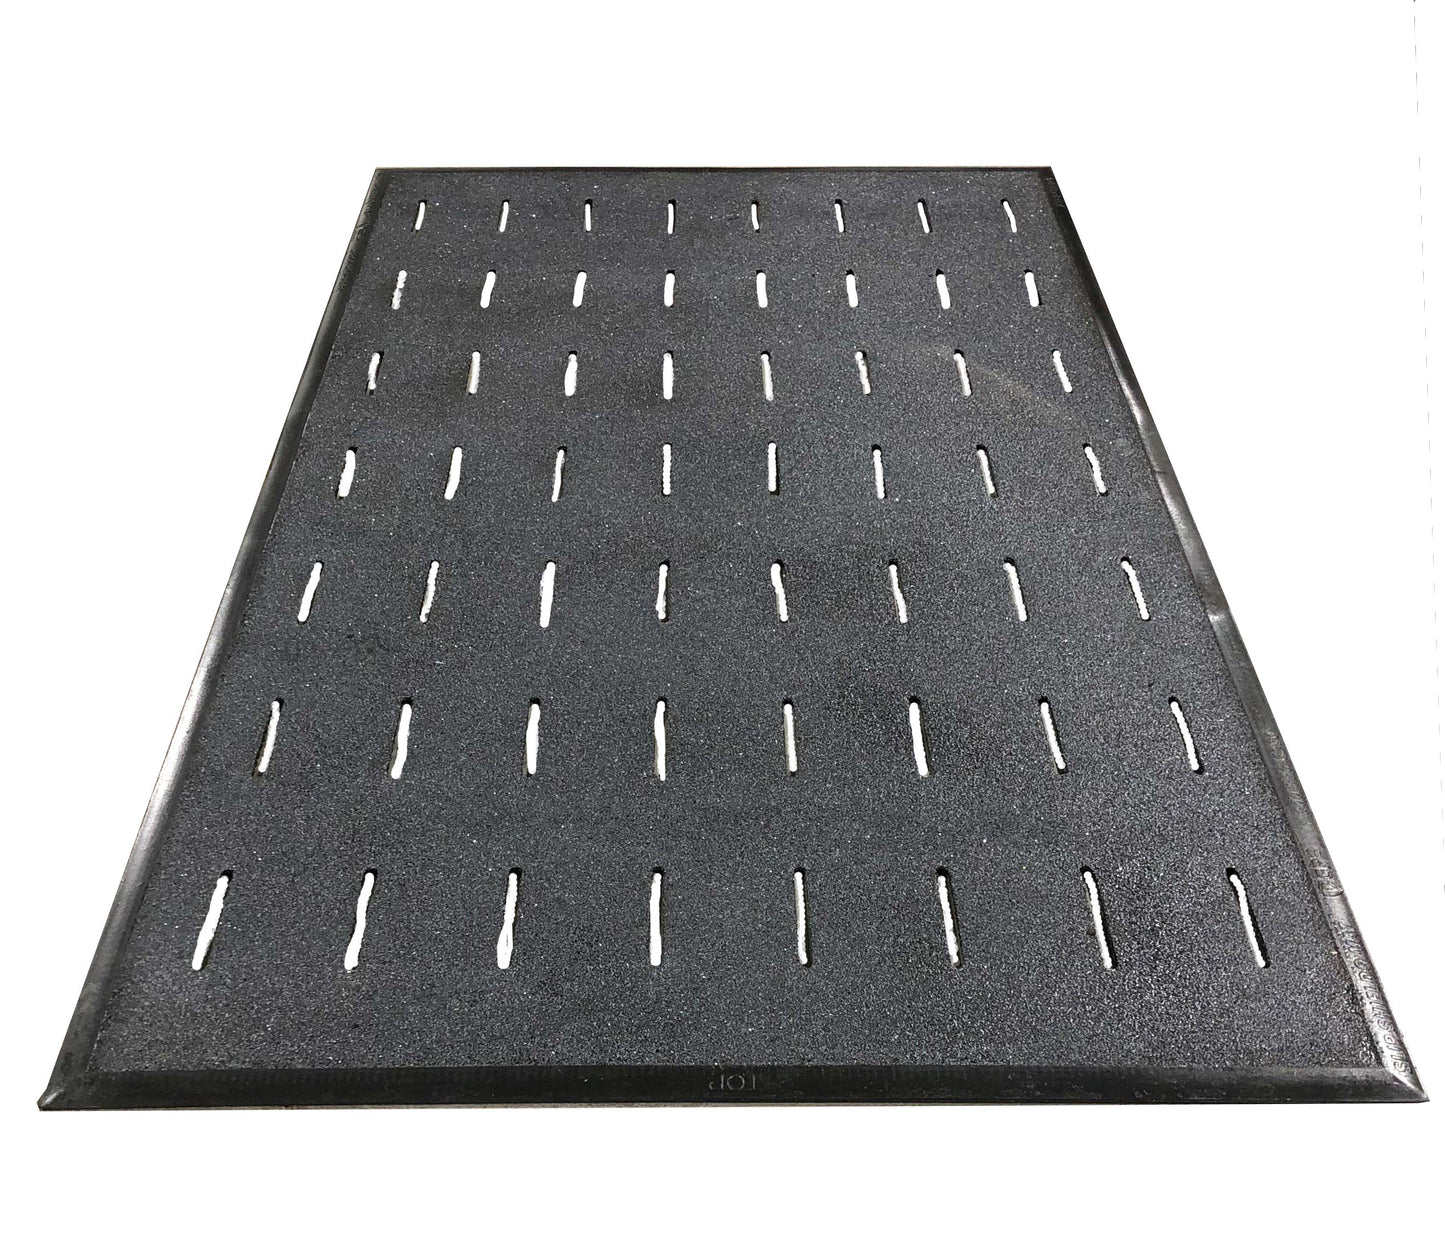 Slip Shield Black 3’ x 5’ Slip-Resistant Kitchen Mat, Drainage Slots, All-Grit, 6.6MM Thickness, Beveled Edges, Sold by Each